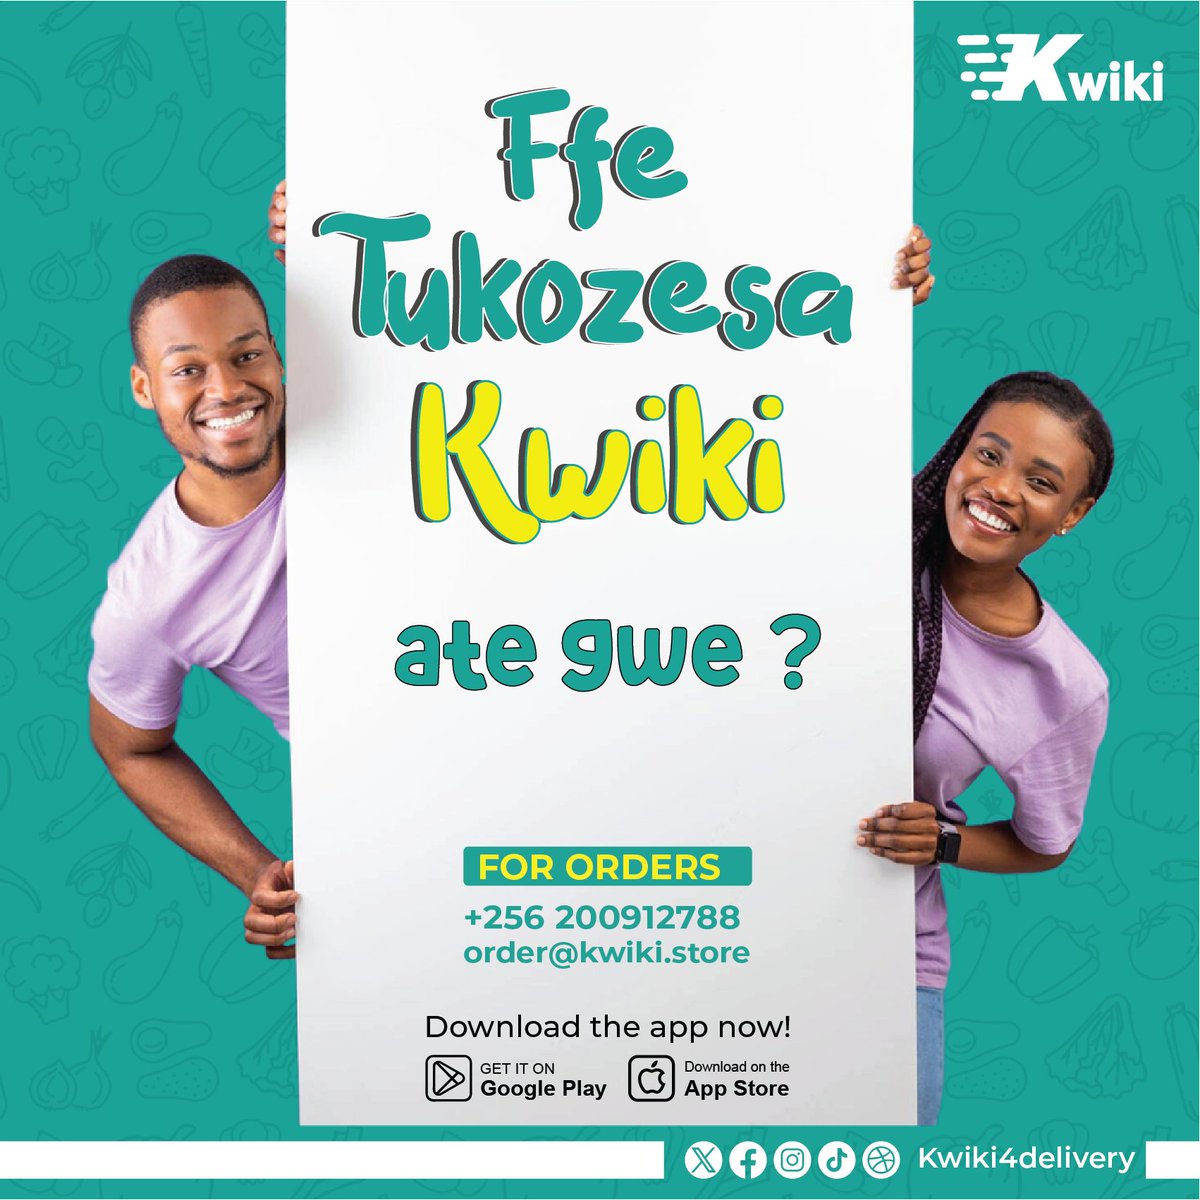 We're on Kwiki these days. What do you use for your team information?        

 #kwikidelivery #kwiki4delivery #fy #viral #kwiki #opennow #breakfast #alwaysontime #doitquickwithkwiki #uganda #food #foodporn #foodie #ordernow #goviral #foryoupage #newtiktoker #fyp #fypシ